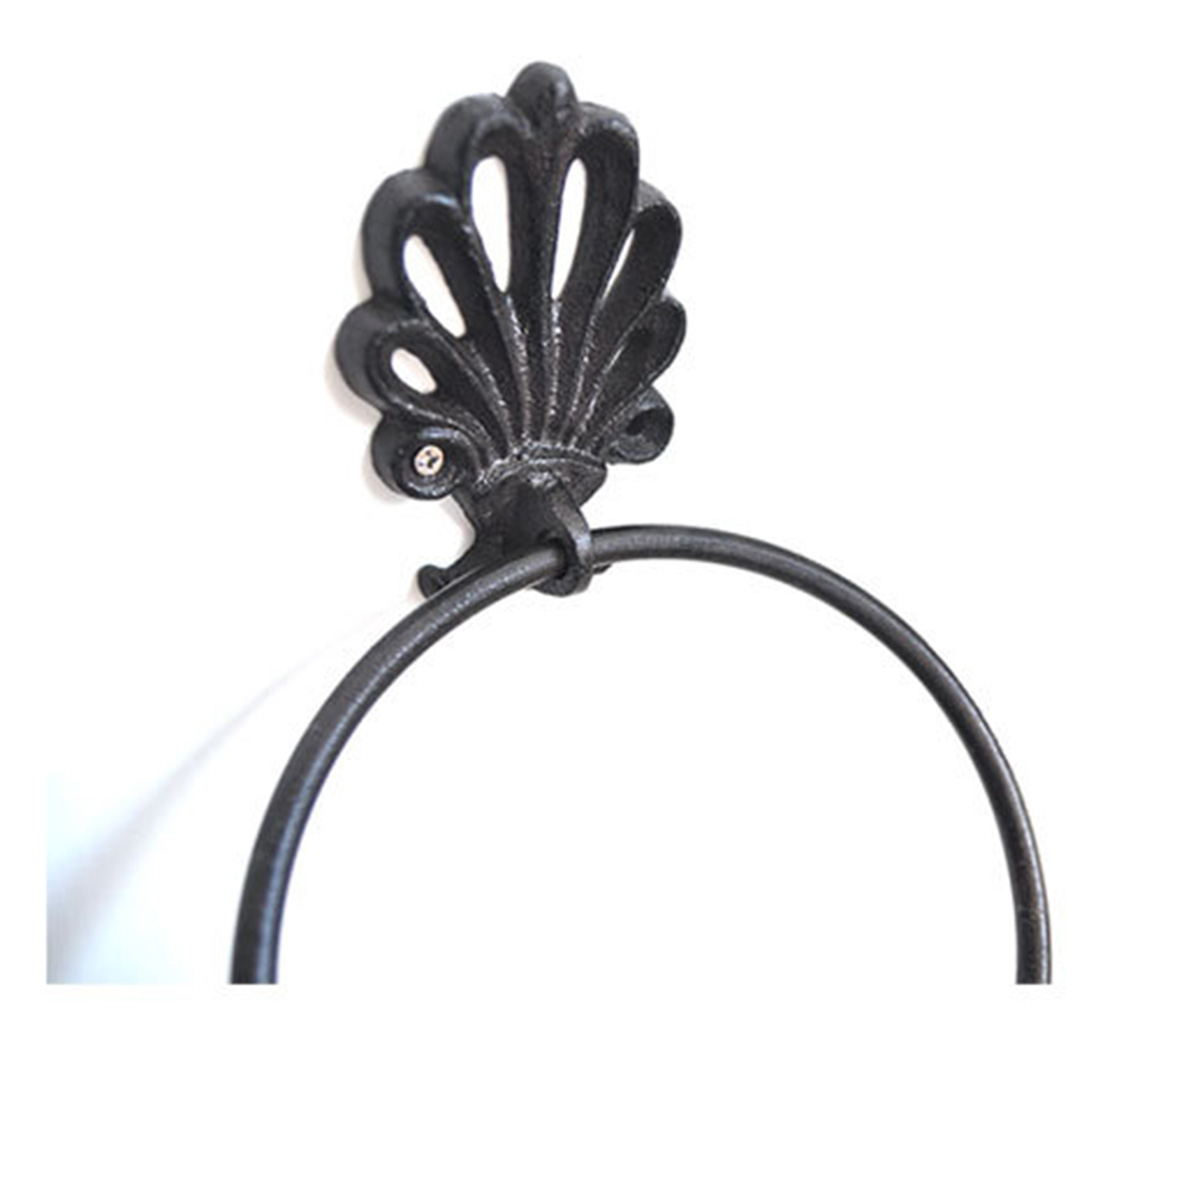 1PC Towel Ring Wrought Iron American Round Shaped Household Vintage Towel Rack Holder for Home Decor Bathroom Toliet